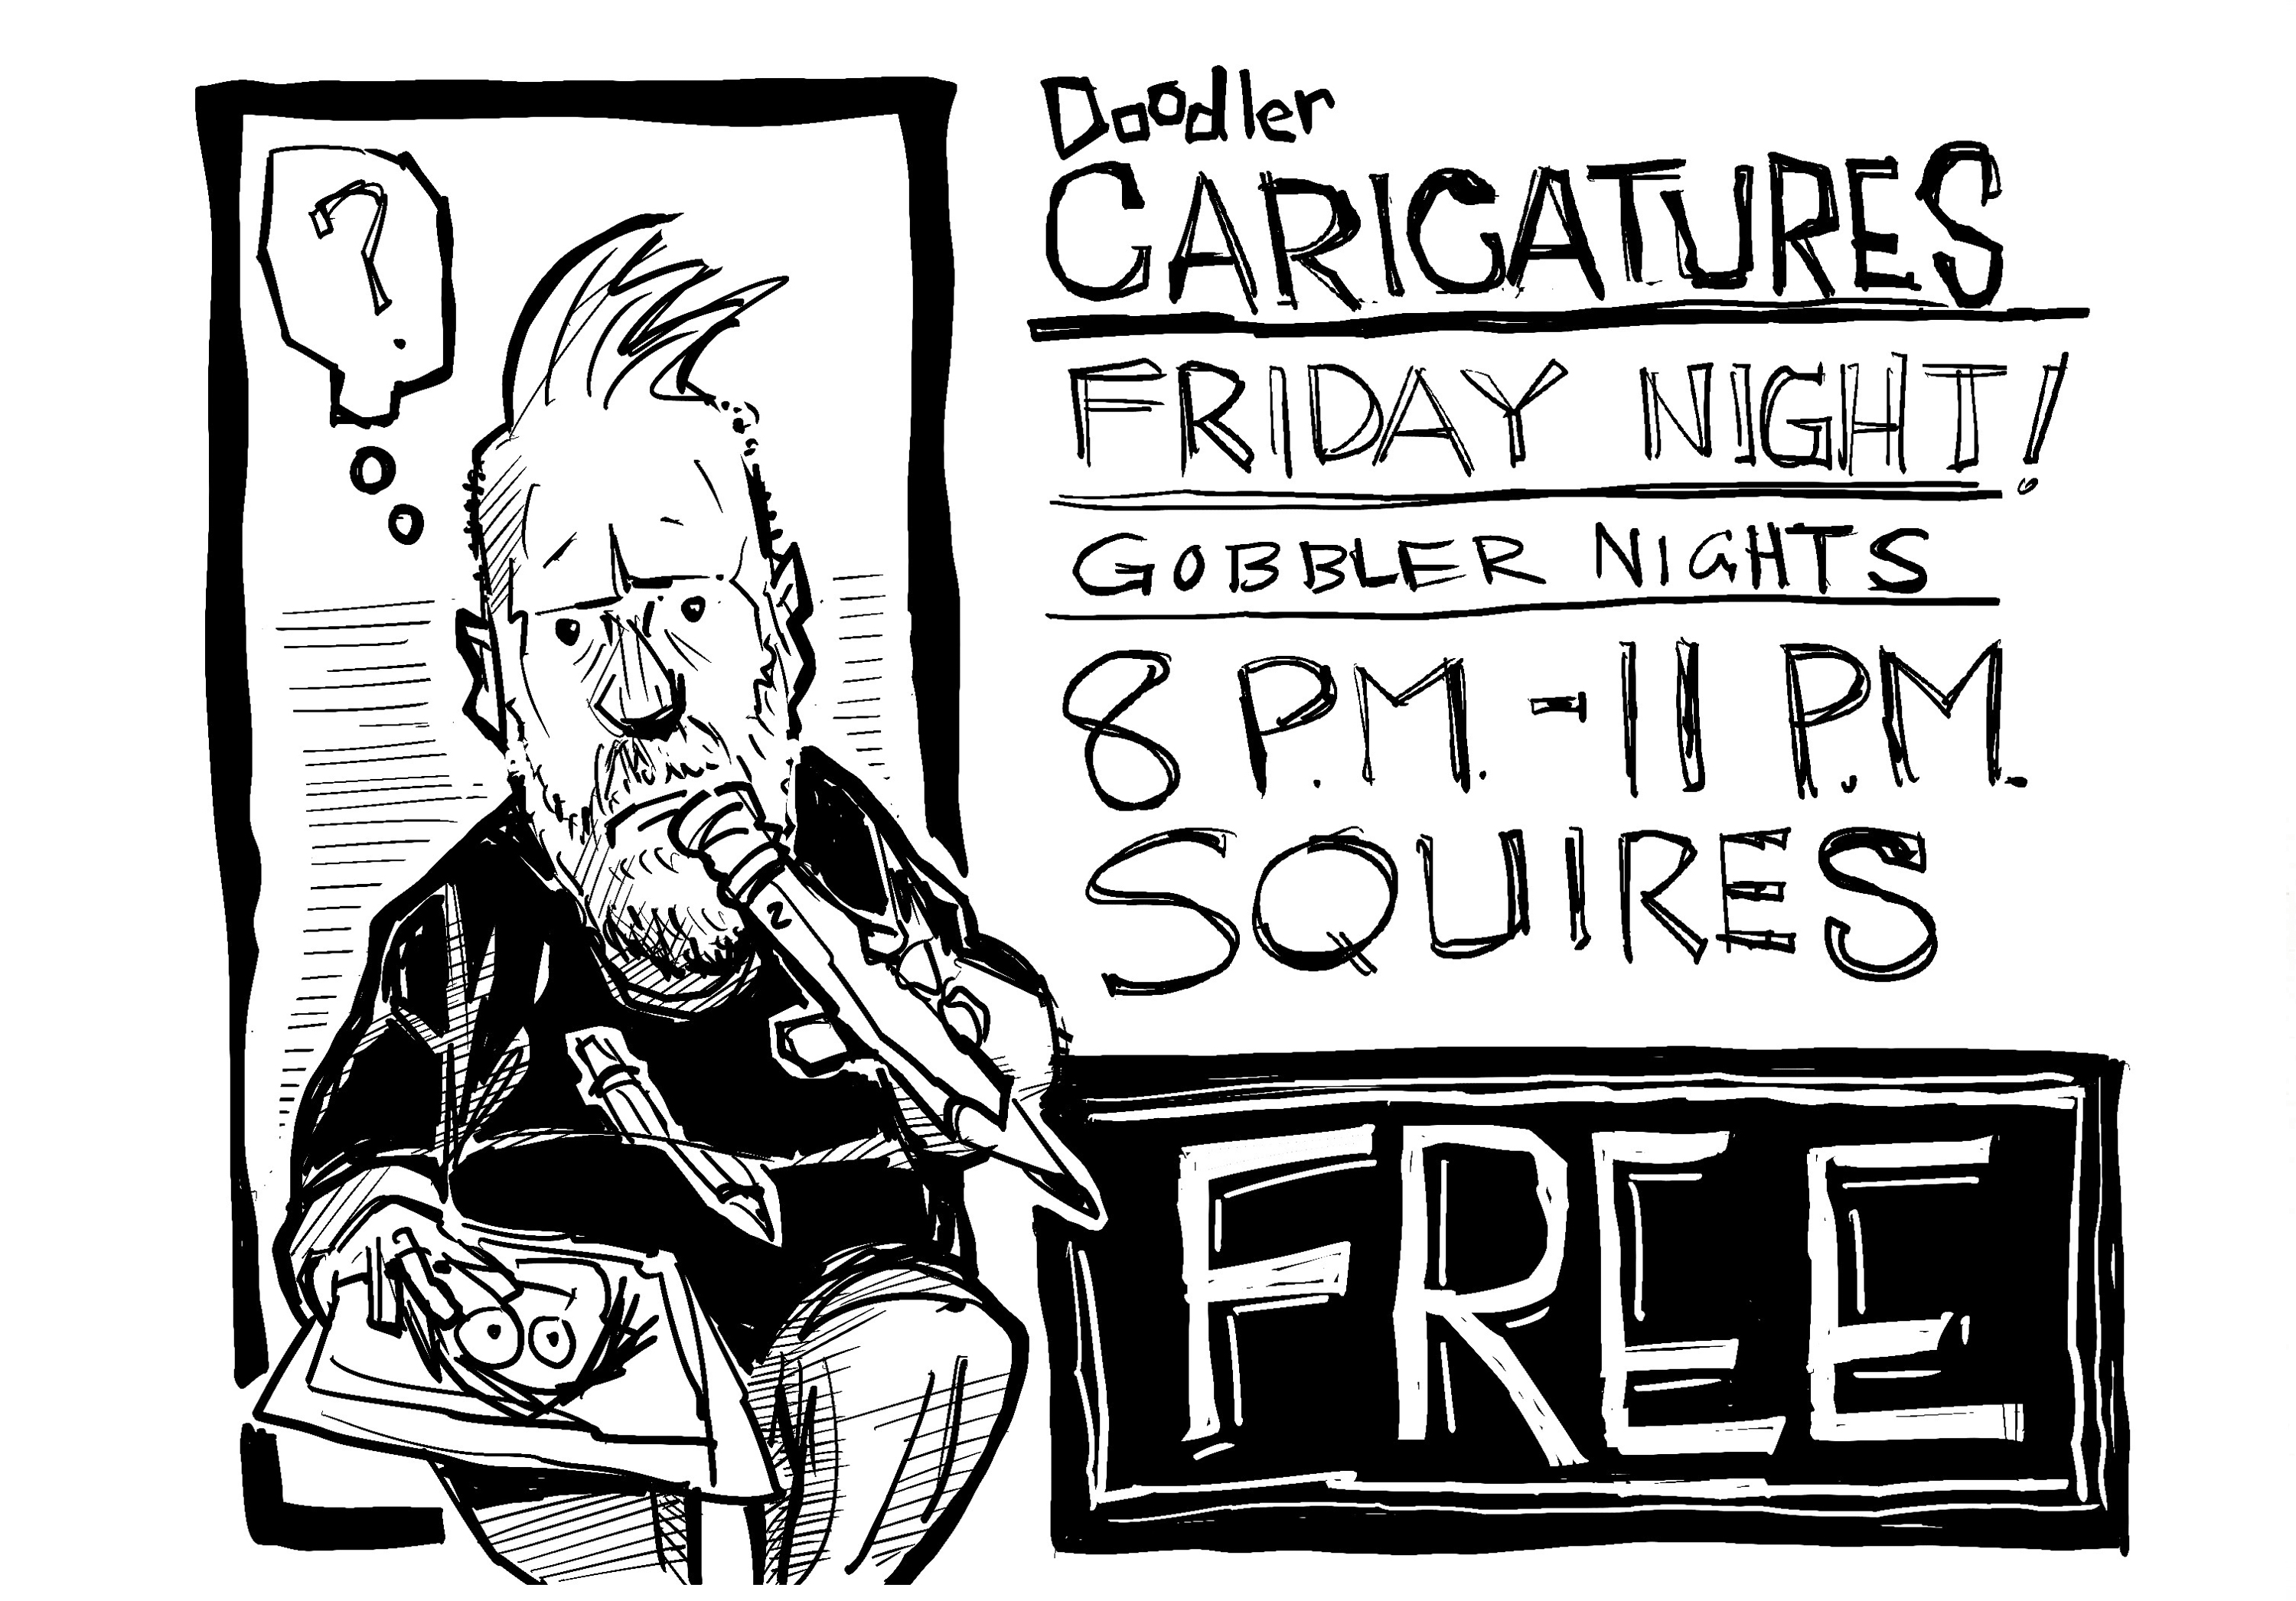 Digital sketch of a promotion of Doodler Caricatures at Squires on Friday night 8 to 11pm